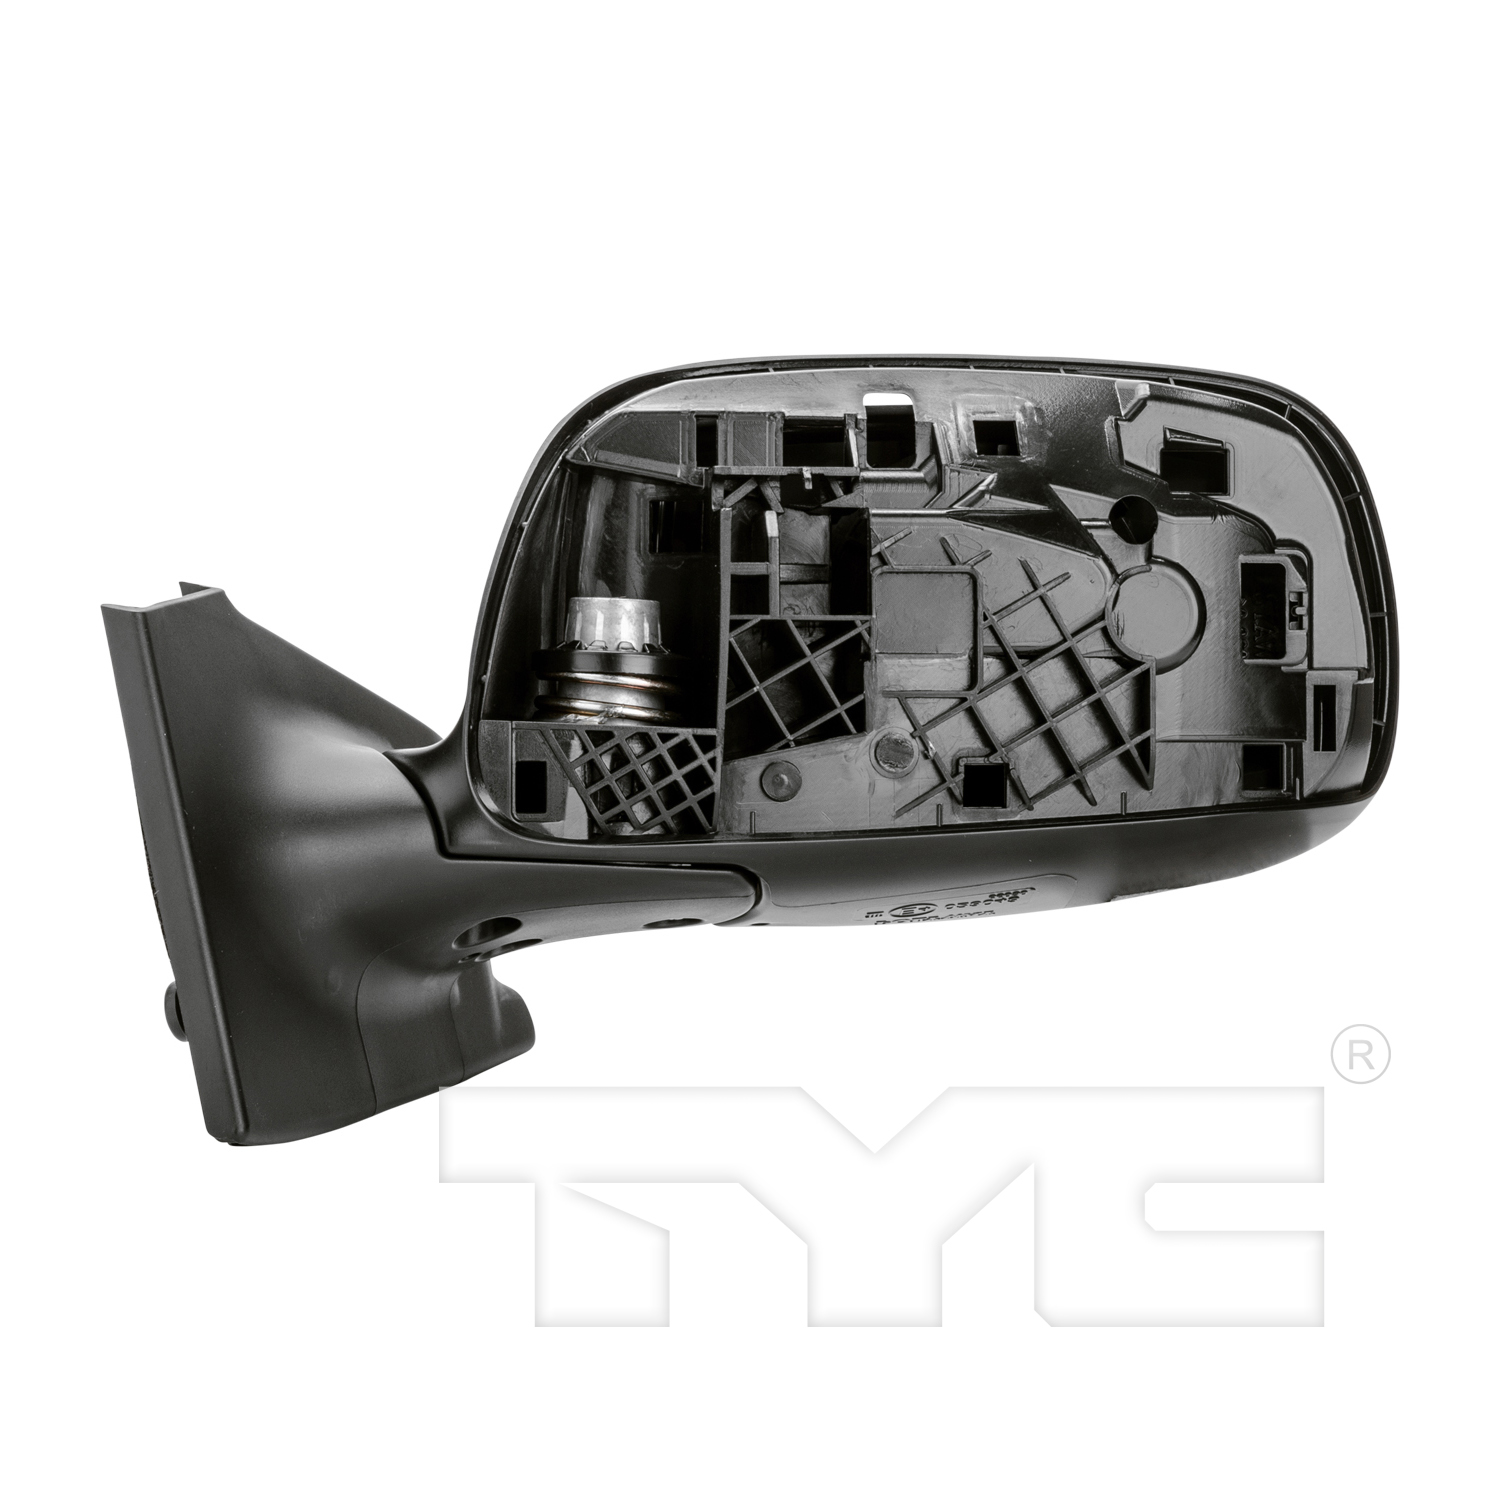 Aftermarket MIRRORS for TOYOTA - YARIS, YARIS,06-11,LT Mirror outside rear view